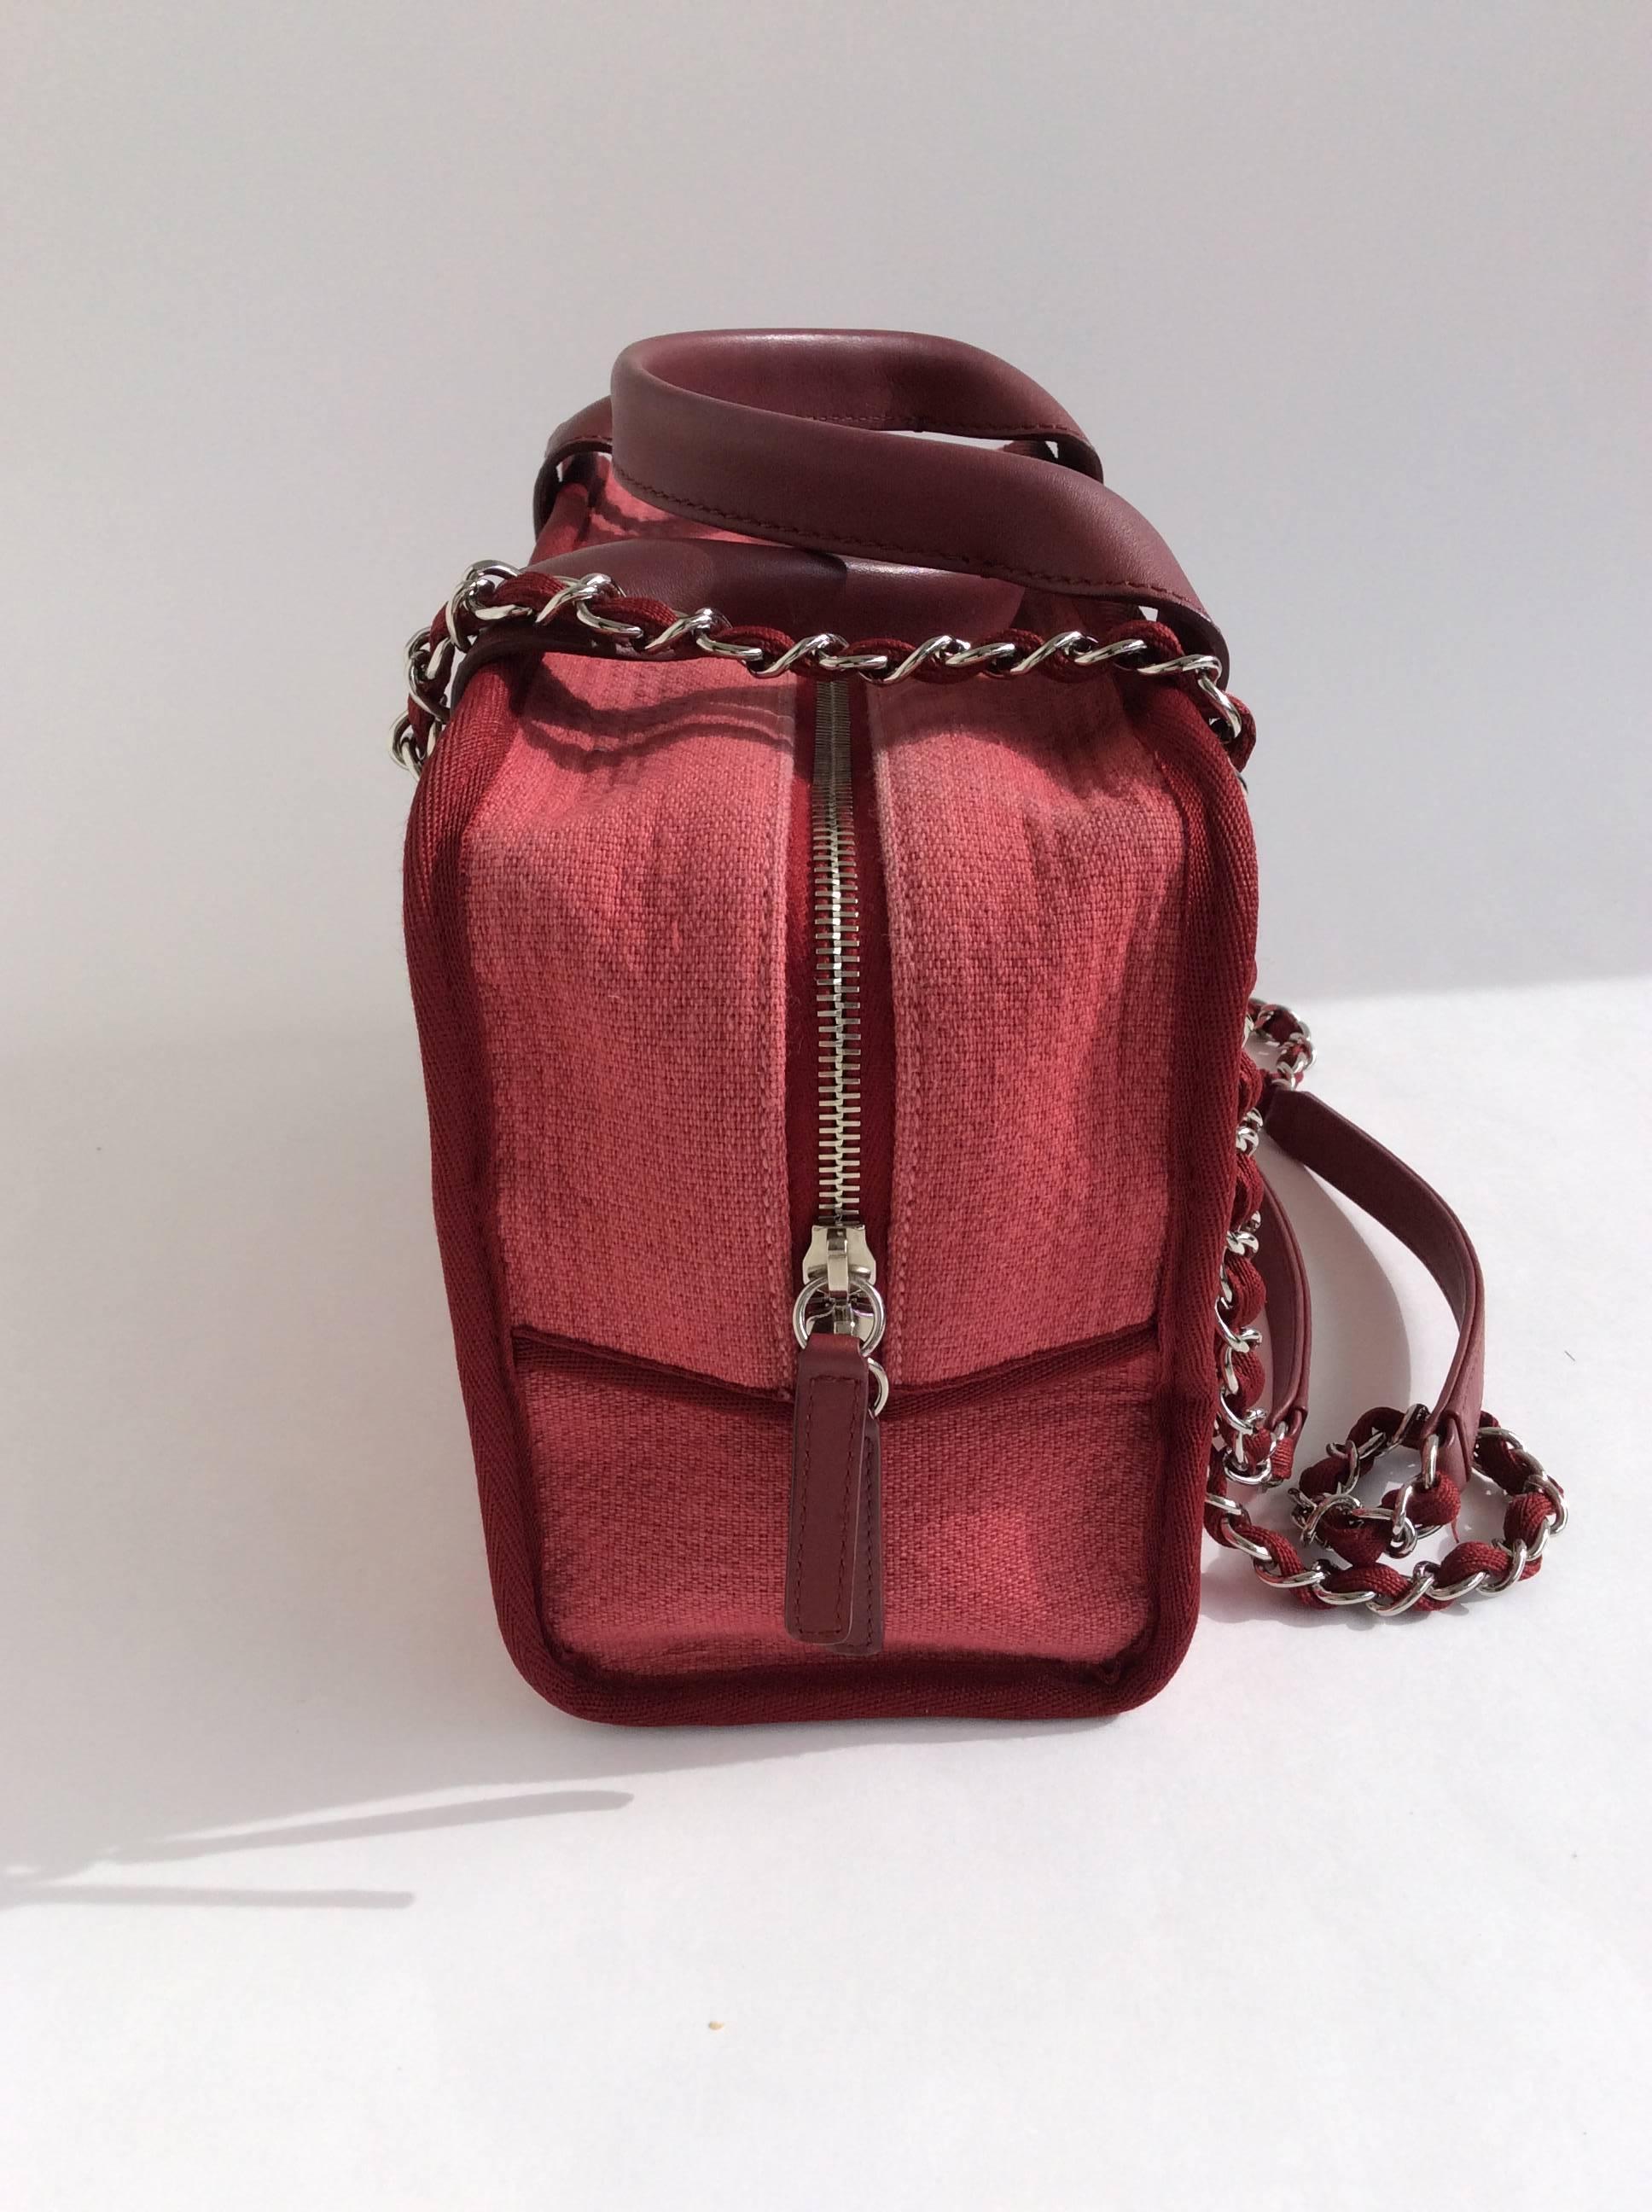 Chanel Burgundy canvas handbag with signature chain straps and leather handles. Zip closure with interior zippered pocket. Dust bag and authenticity card included. 

Dimensions: 10.5x7x4.5 inches

Strap drop: 14 inches

